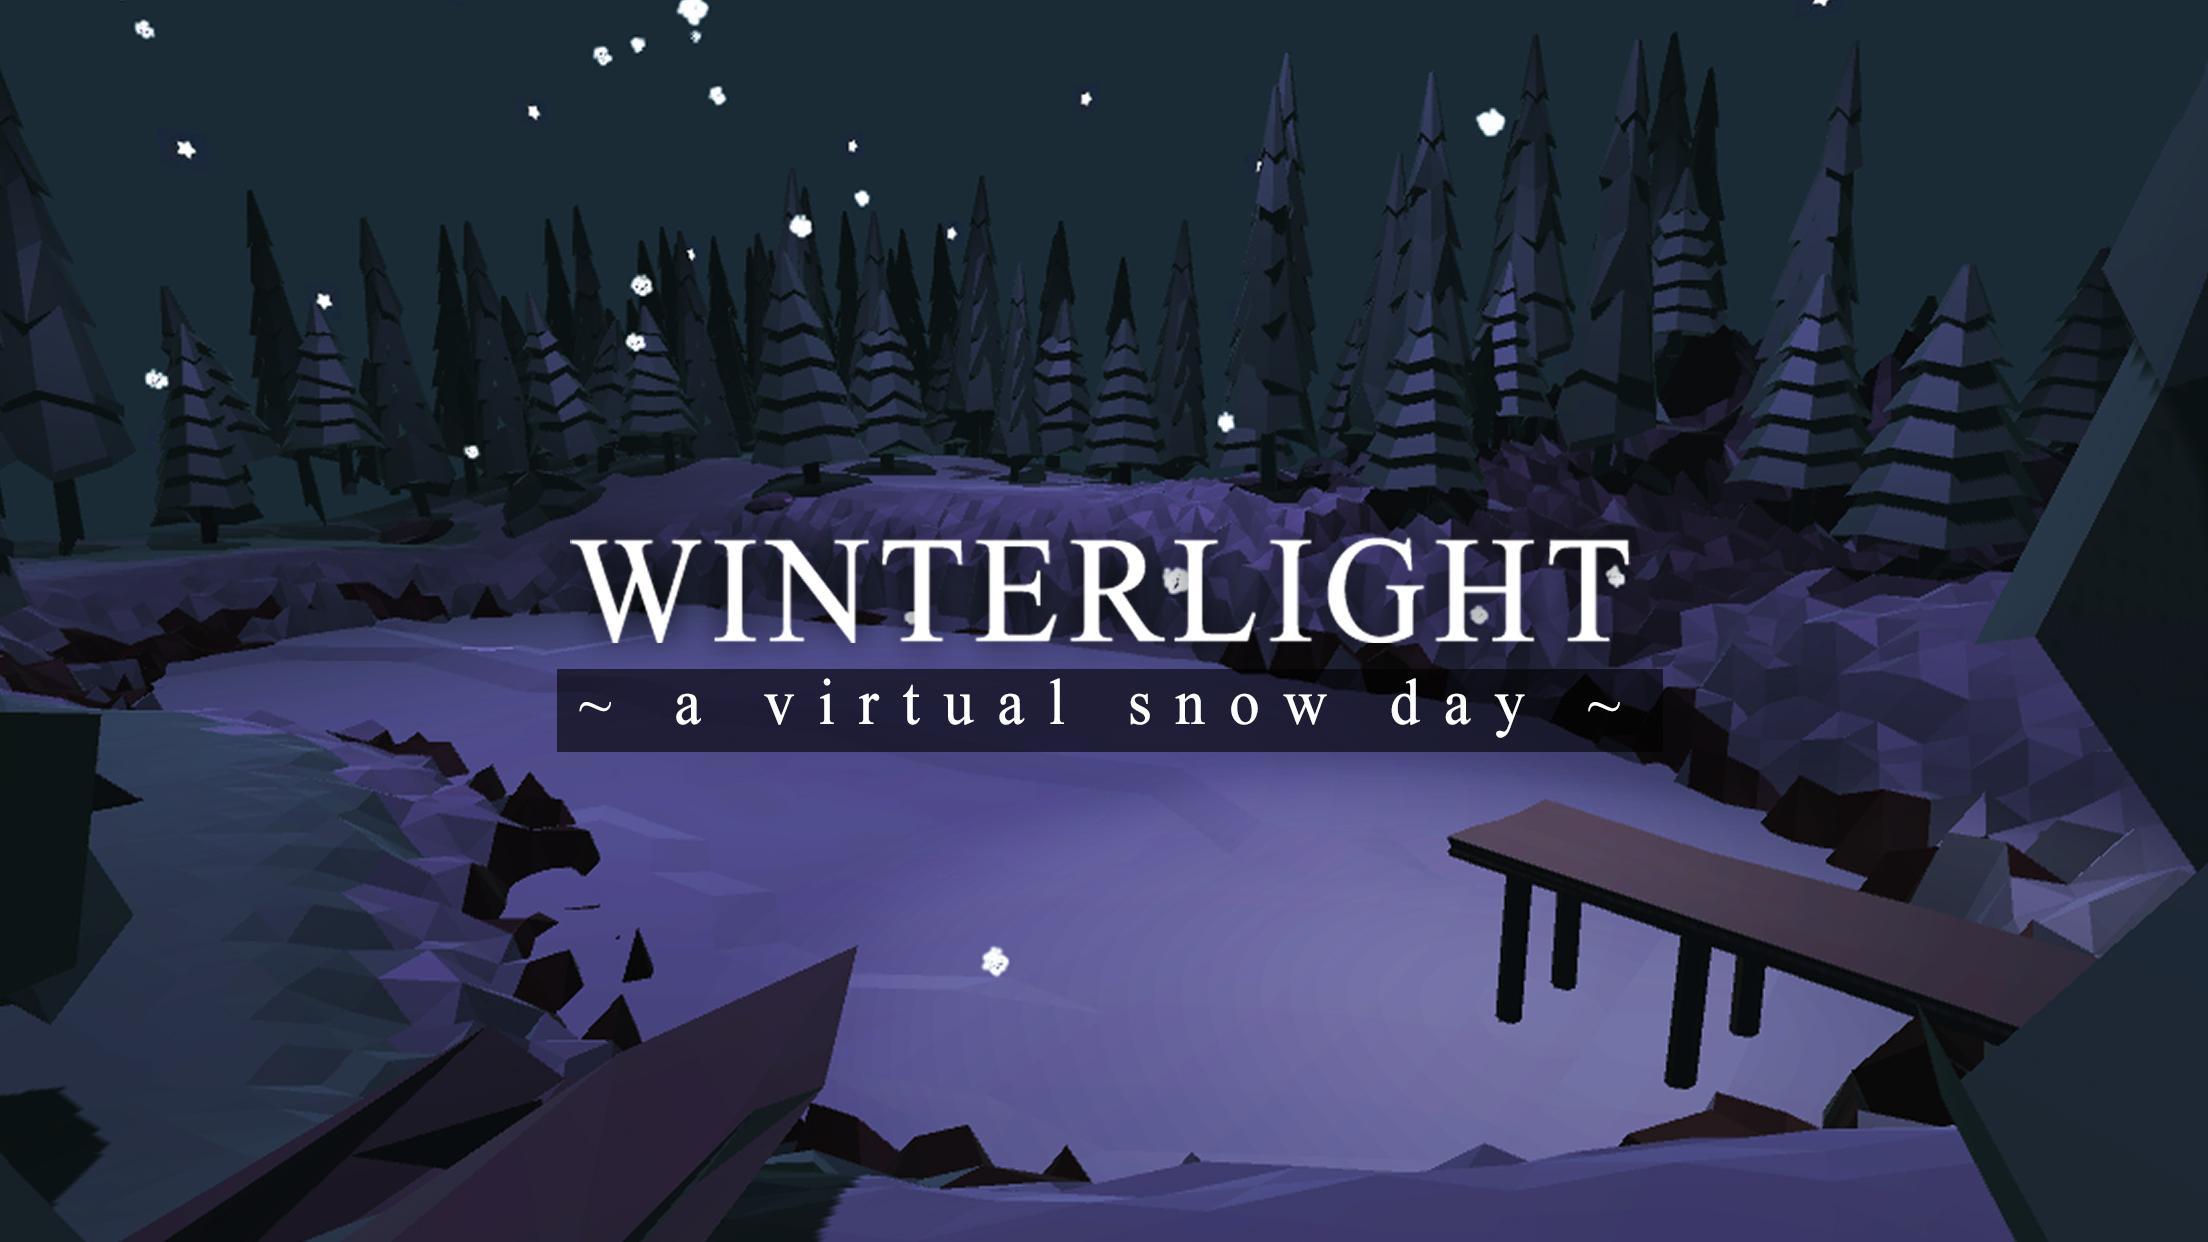 The title screen for Winterlight